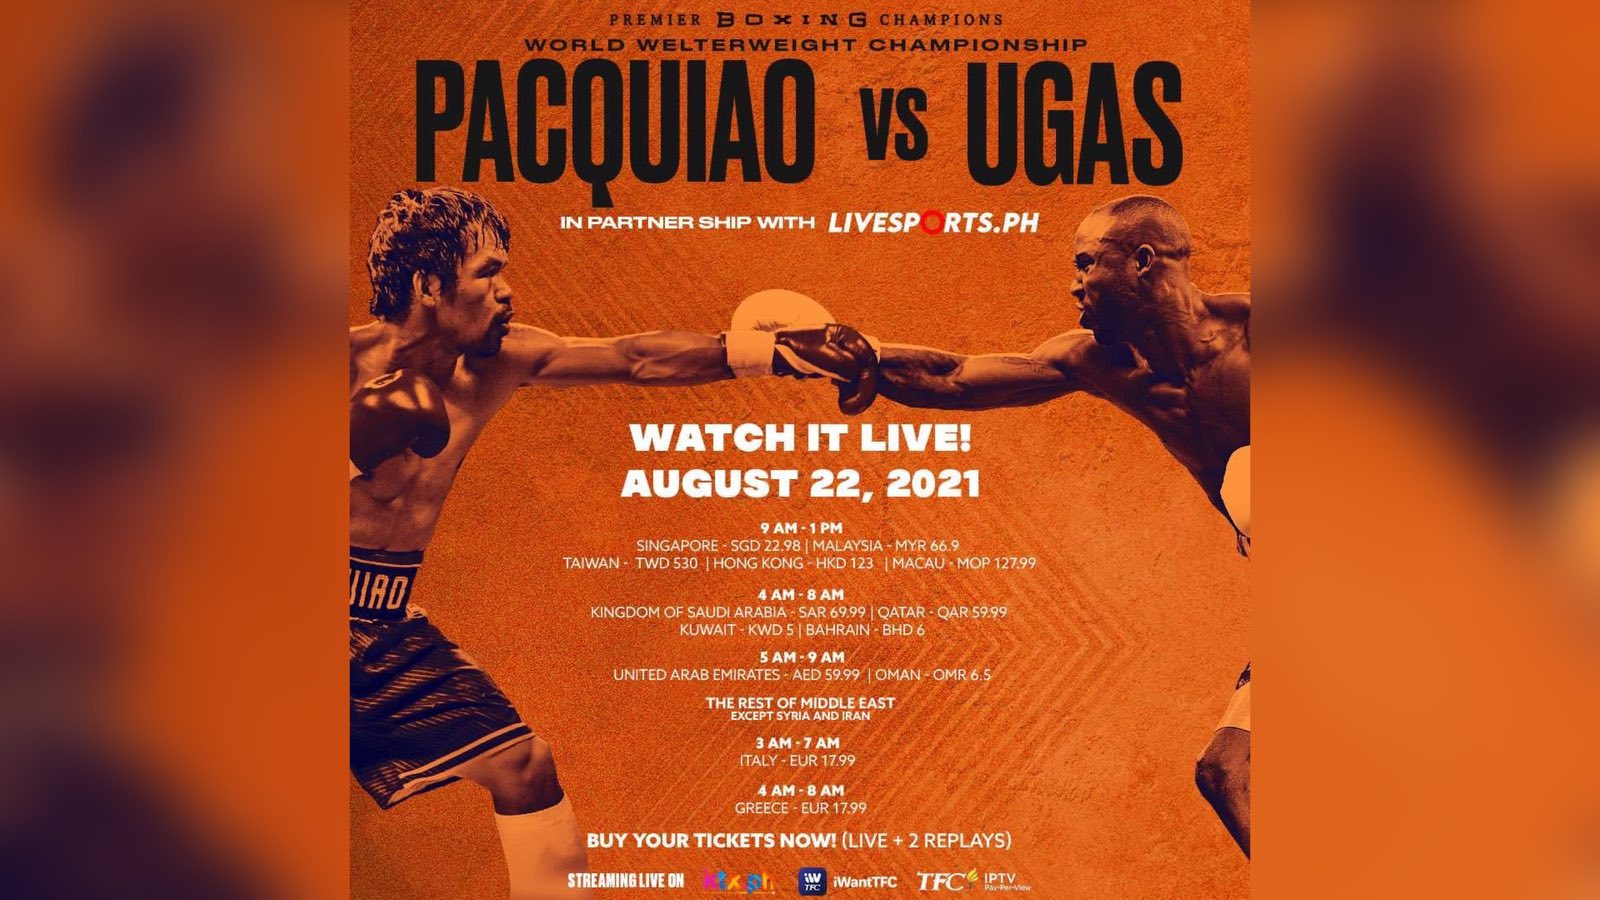 ABS-CBN TFC LIVE PPV still on as Manny Pacquiao faces new opponent, Yordenis Ugas